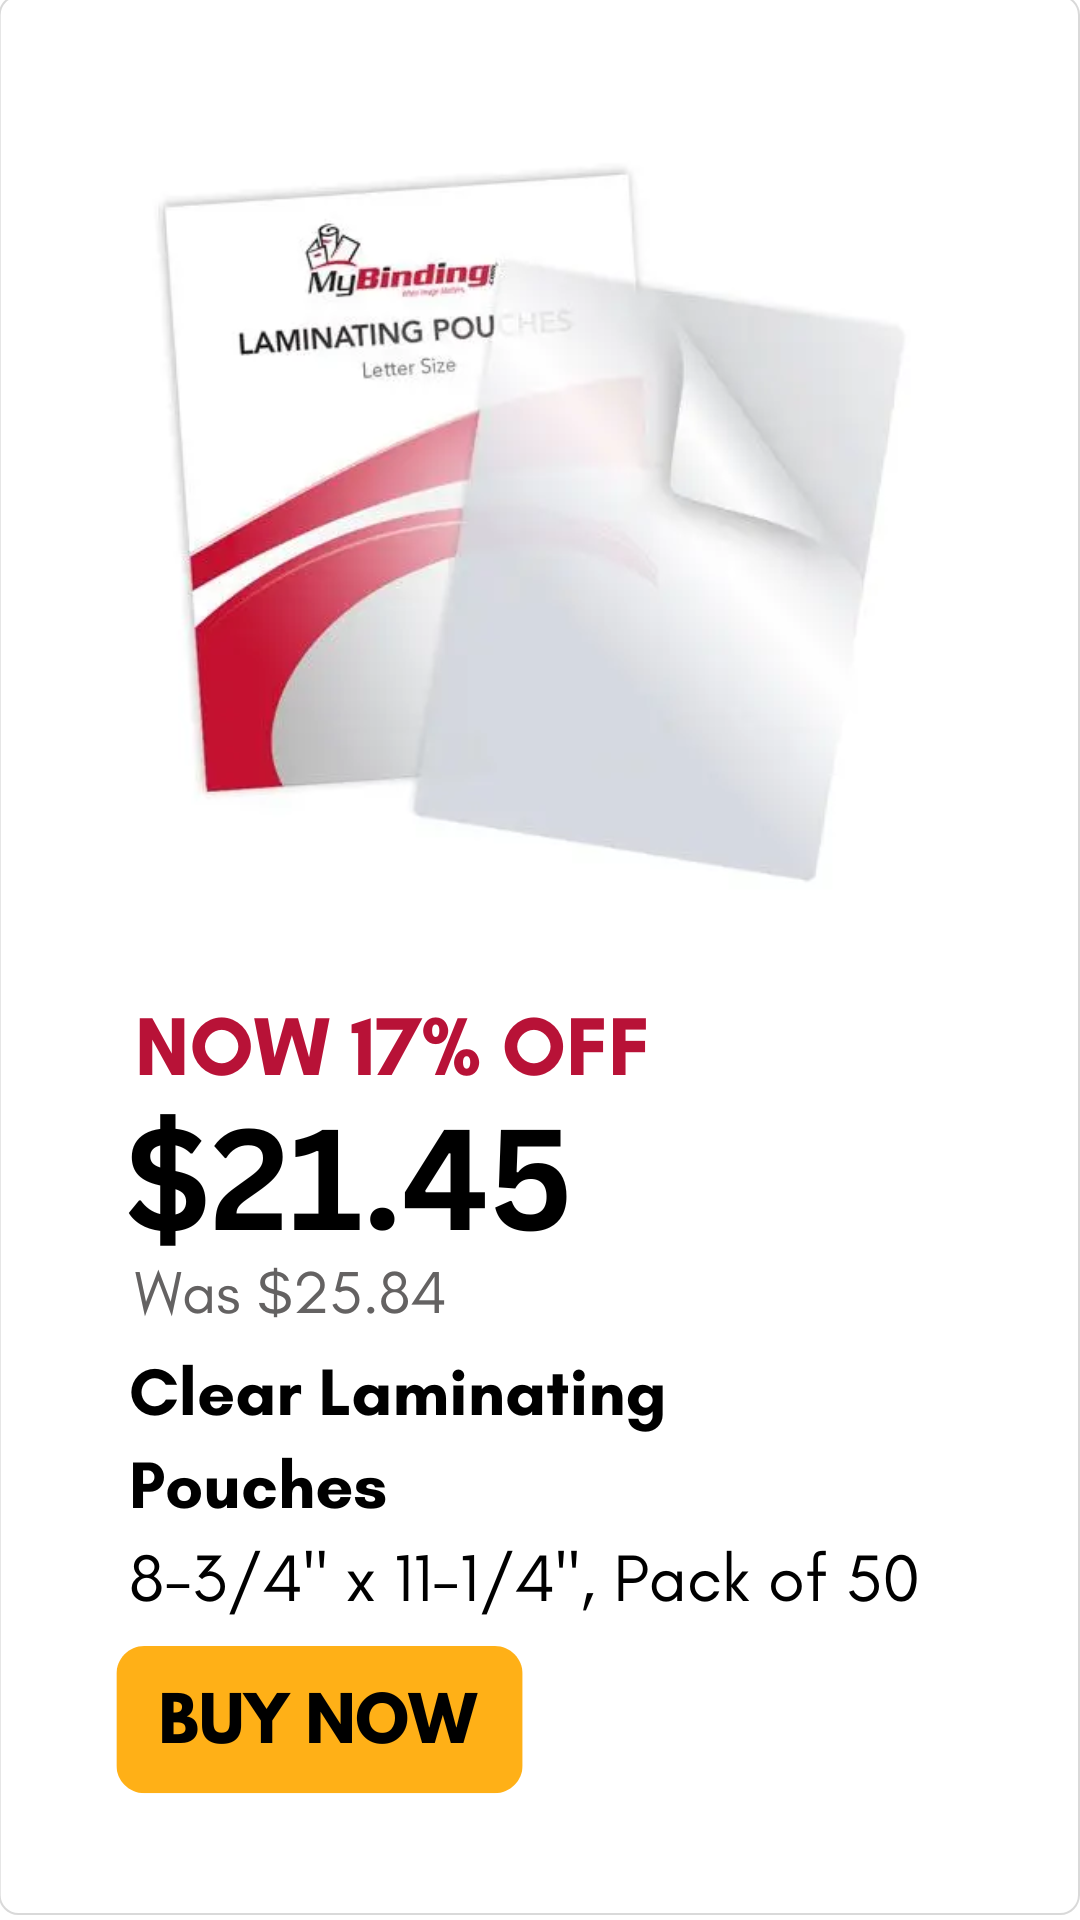 Clear Laminating Pouches letter size on sale for 17% off on MyBinding.com